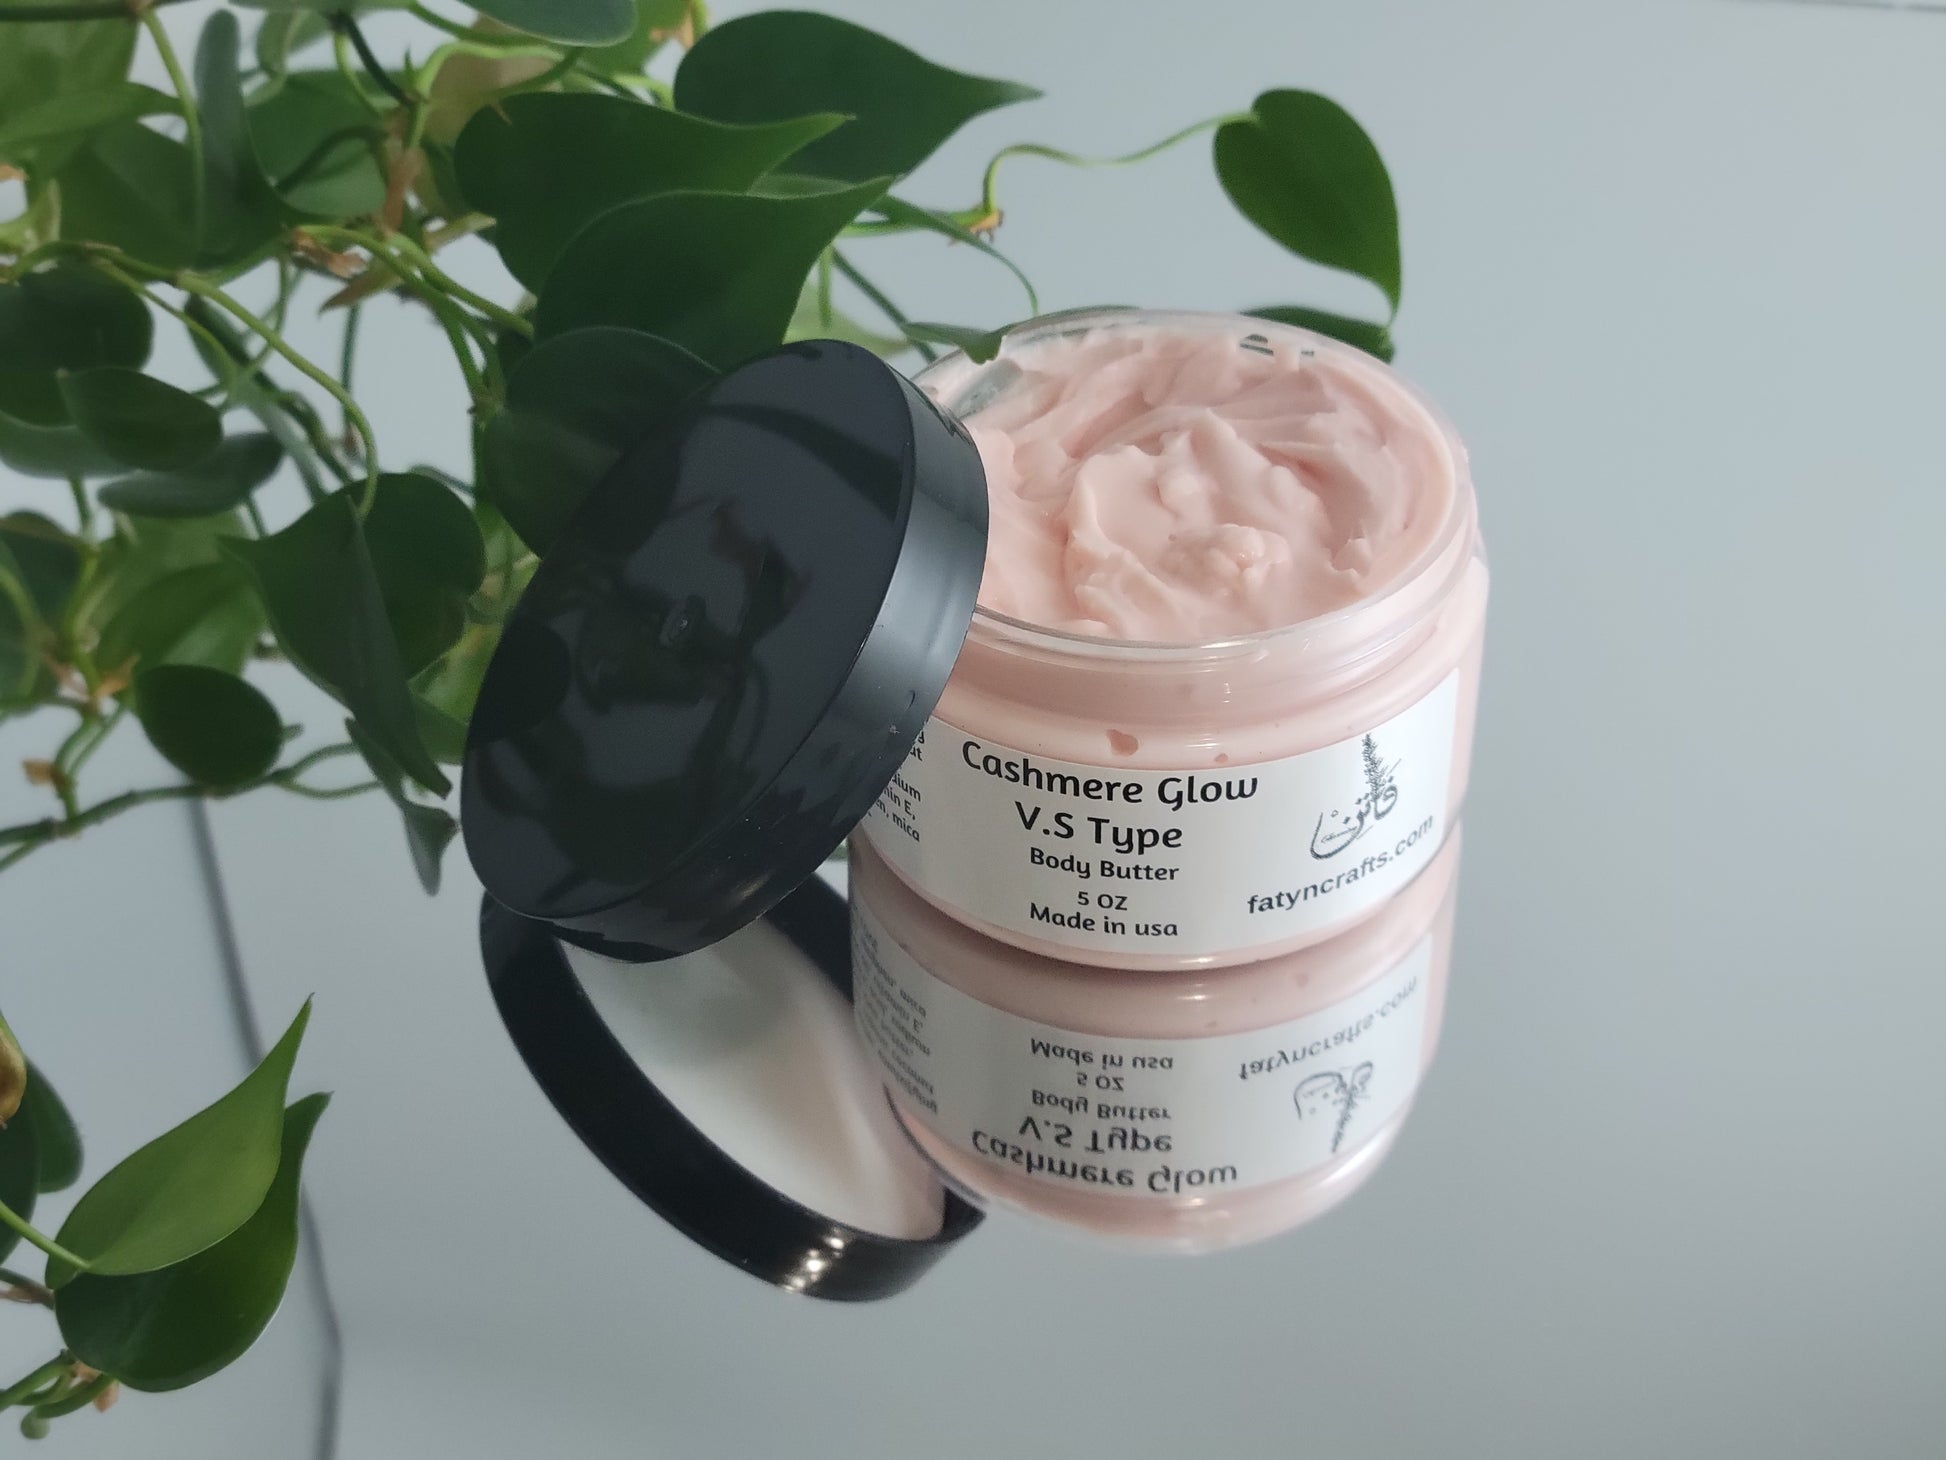 Cashmere glow emulsifying body butter for dry skin – Fatyncrafts